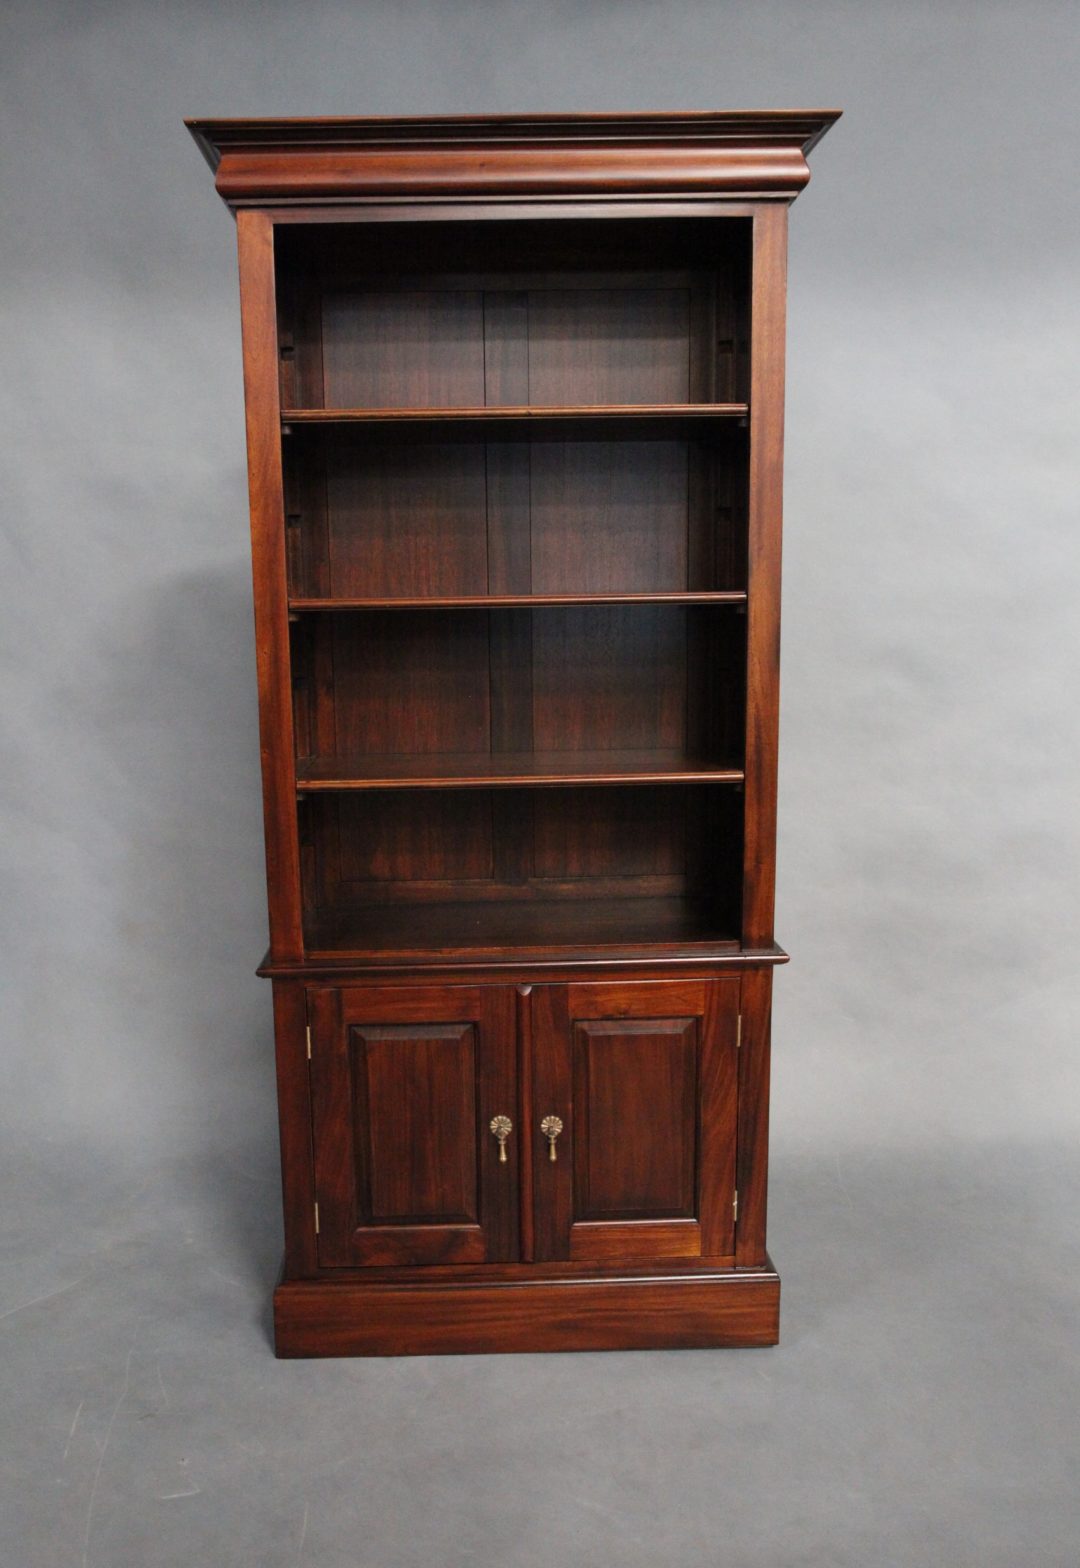 Solid Mahogany Wood Bookcase with Cupboard and Shelves | Turendav